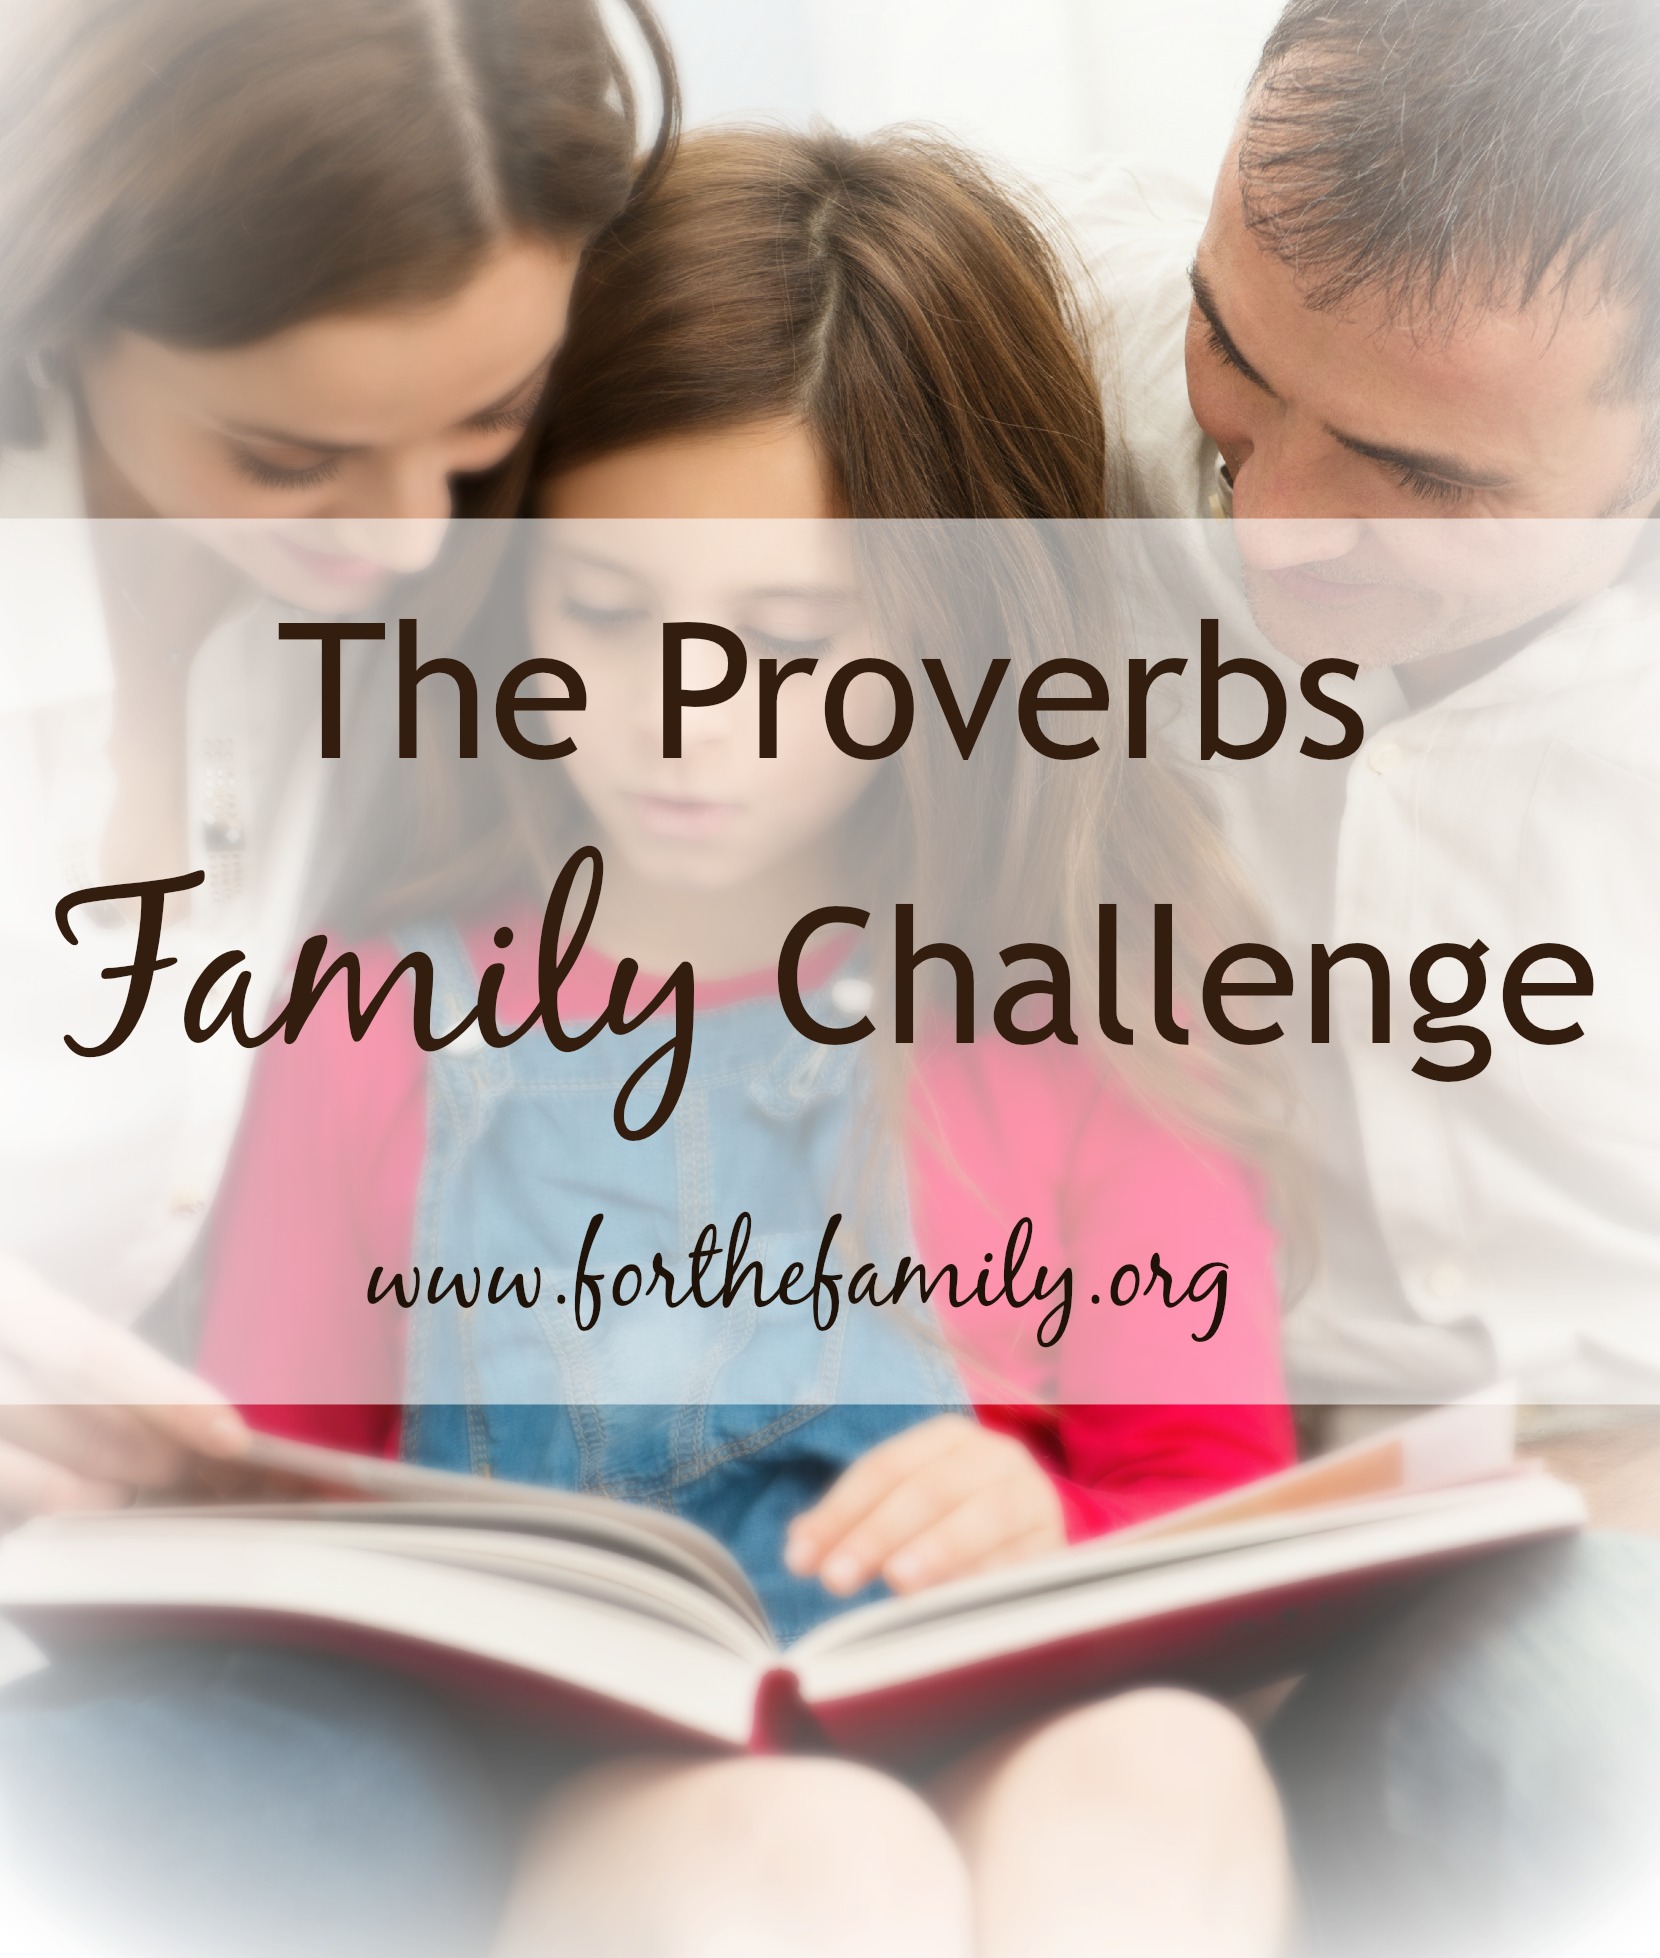 The Proverbs Family Challenge